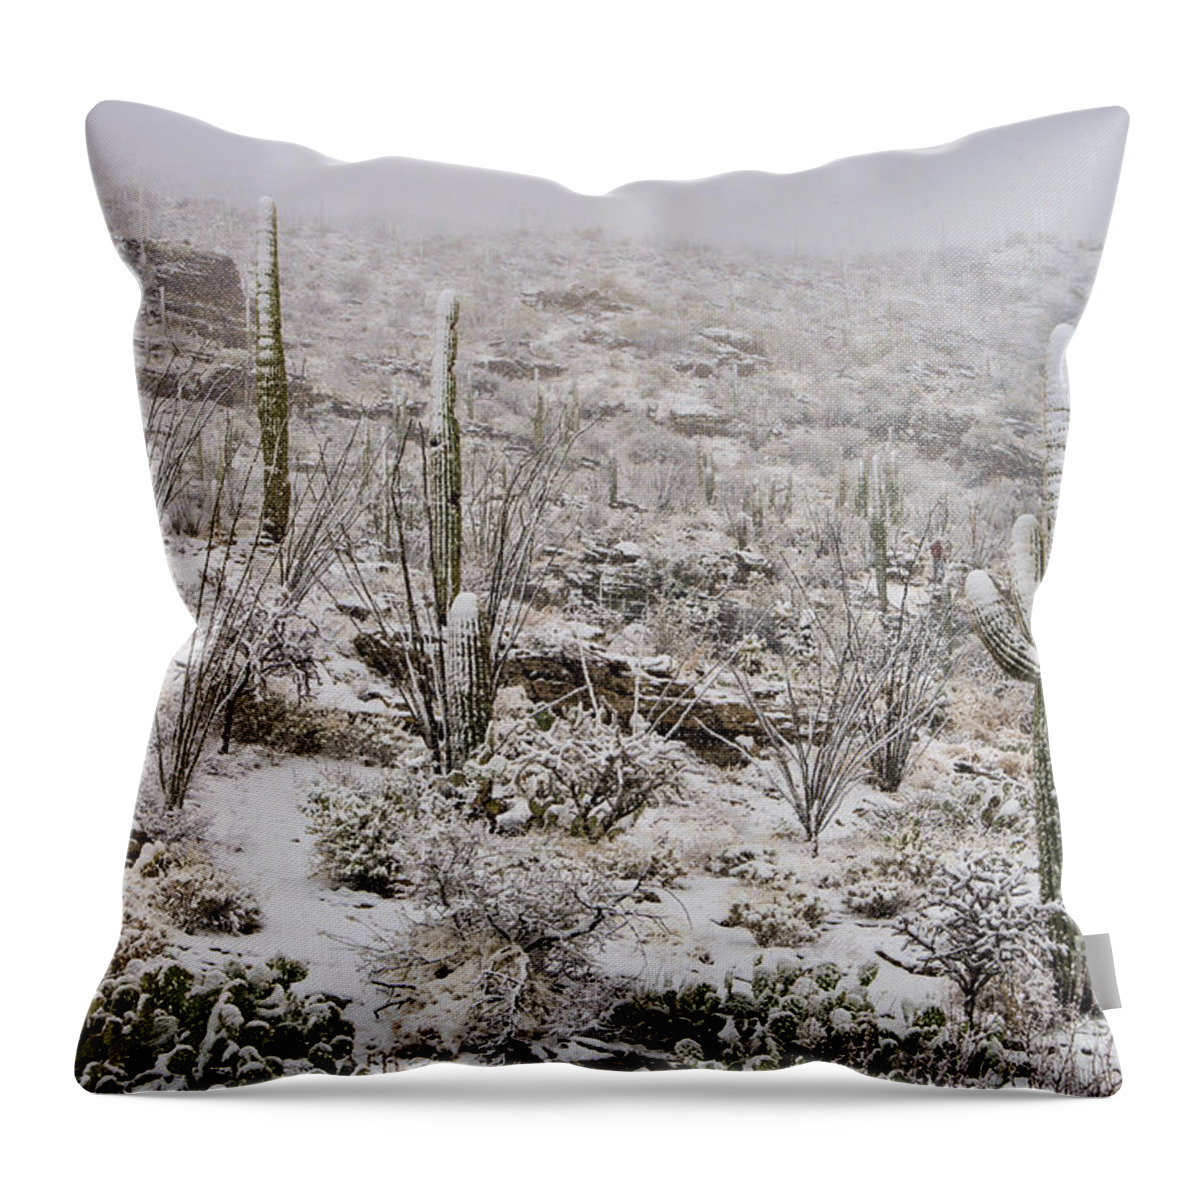 Southwest Throw Pillow featuring the photograph Winter In The Desert by Sandra Bronstein